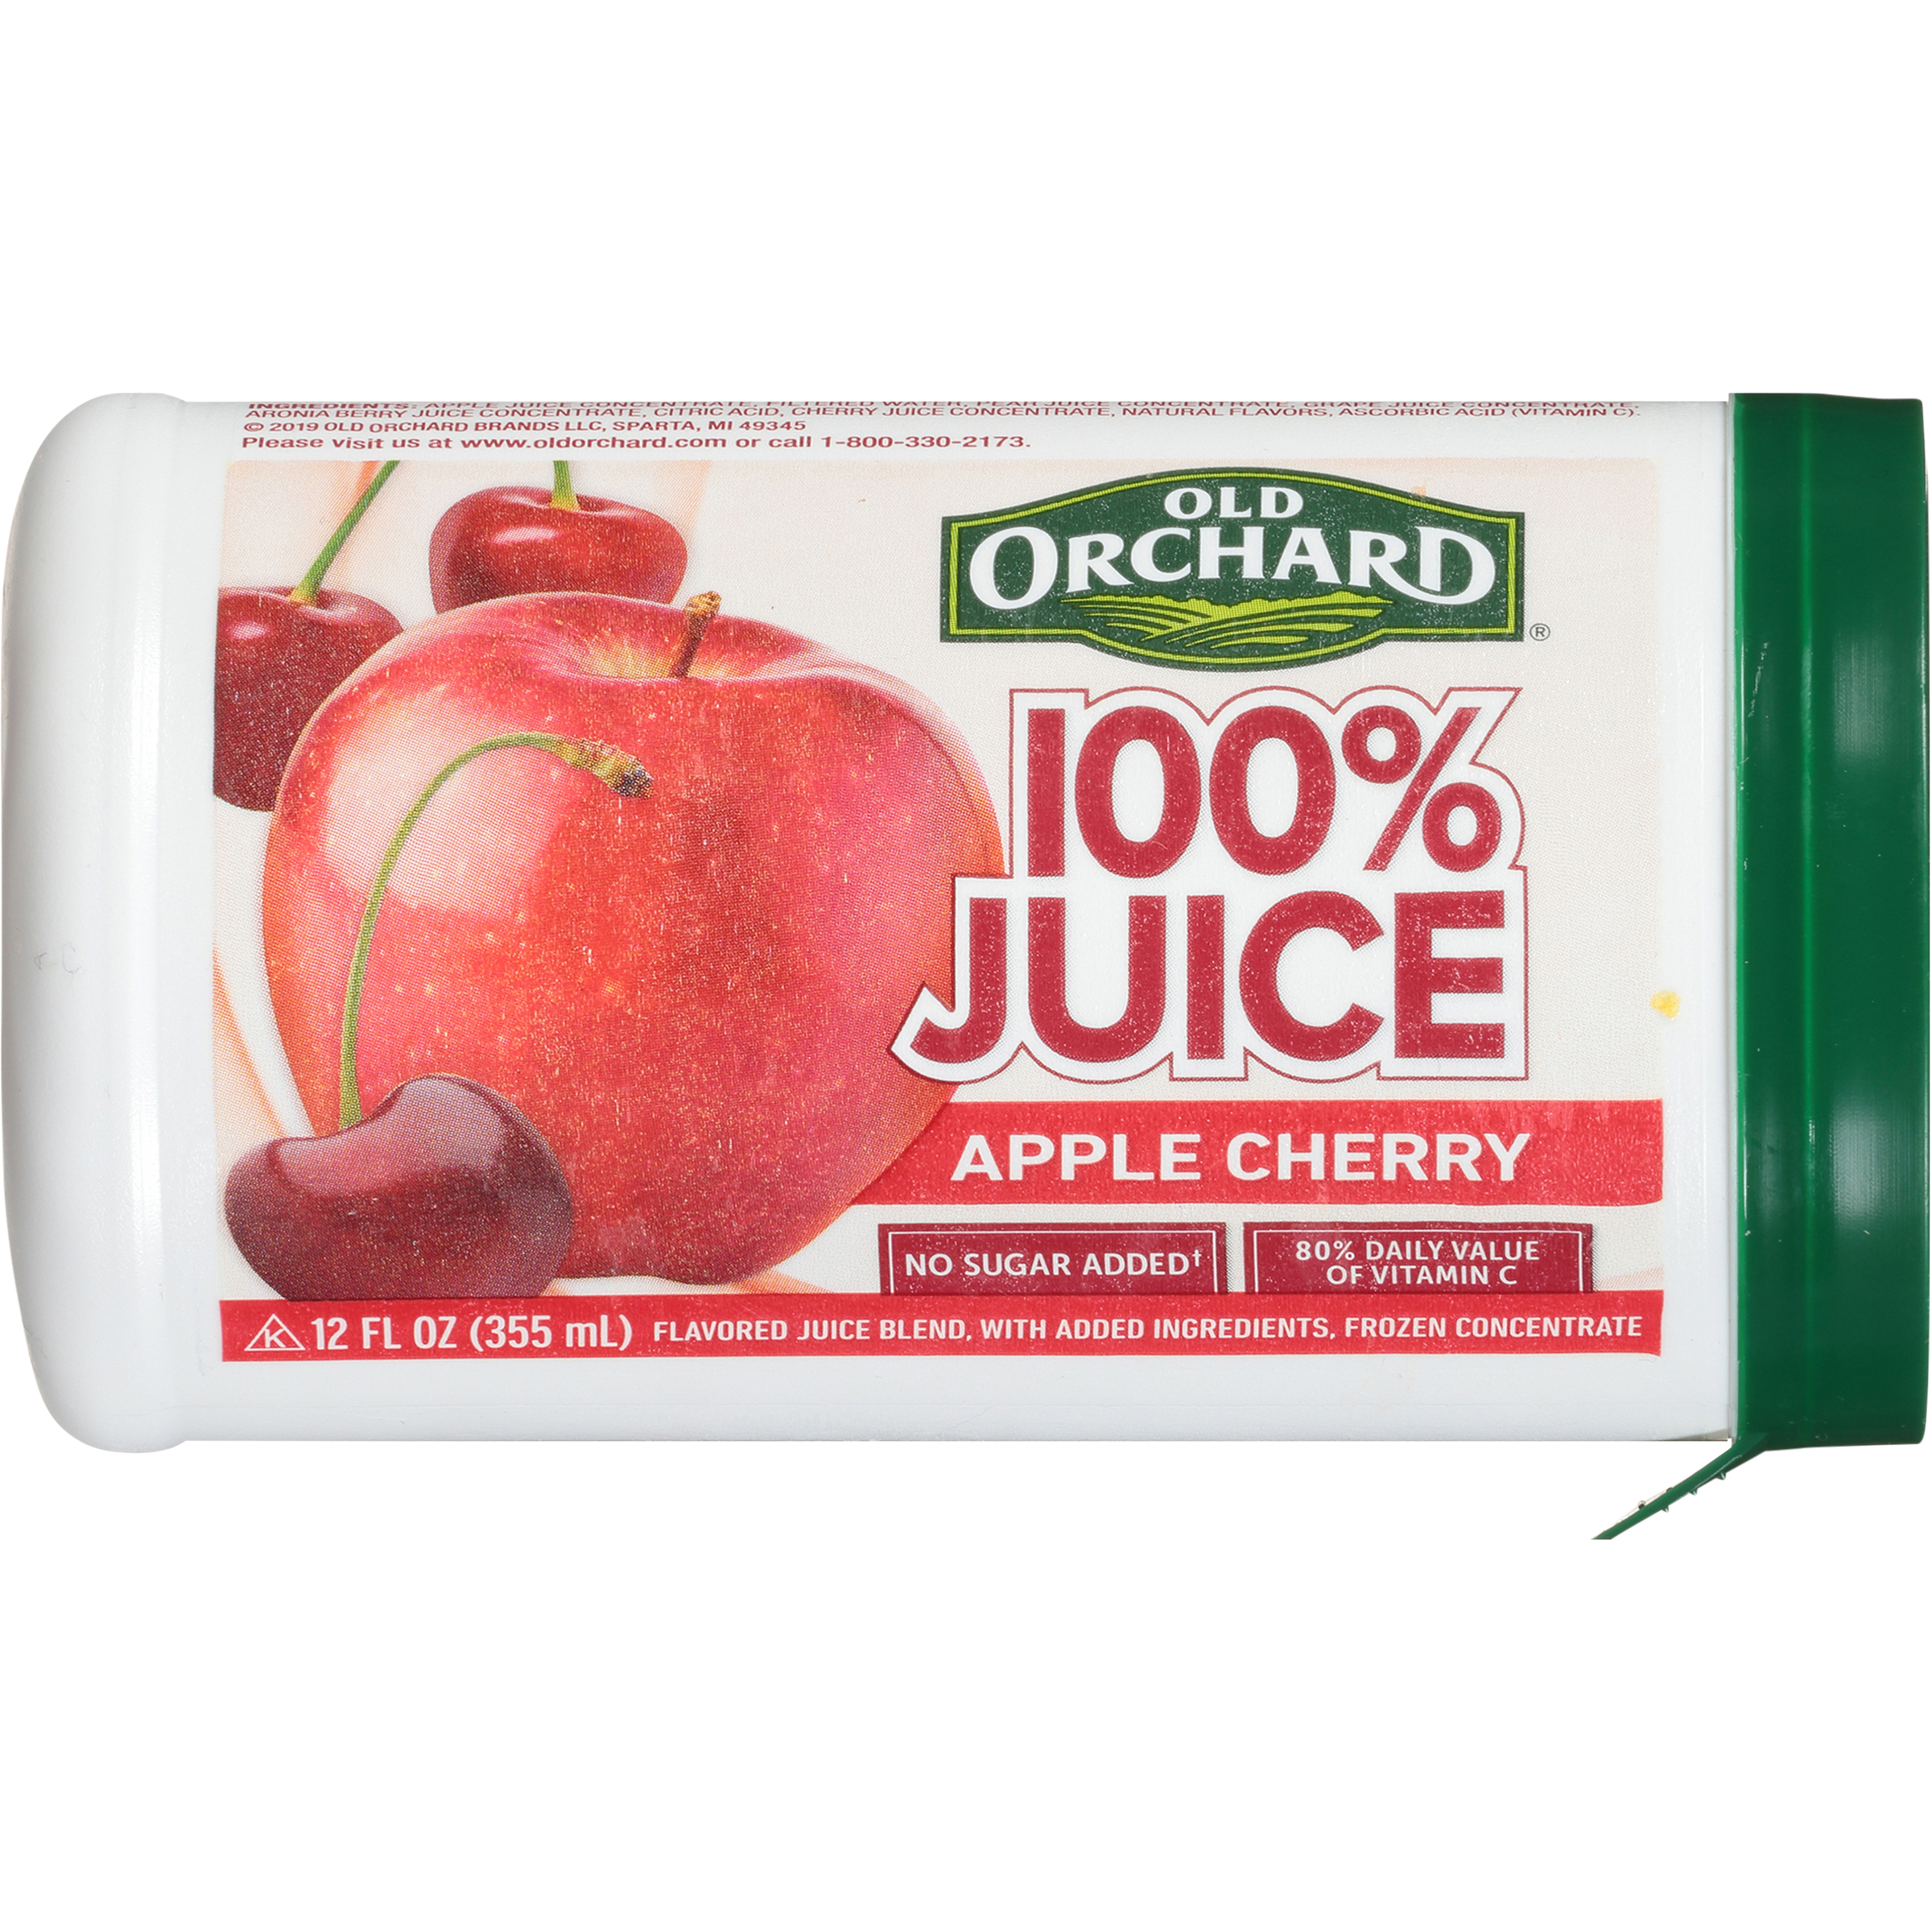 Old Orchard Apple Cherry Flavored 100% Juice Blend, 12 oz Frozen Concentrate - image 3 of 7